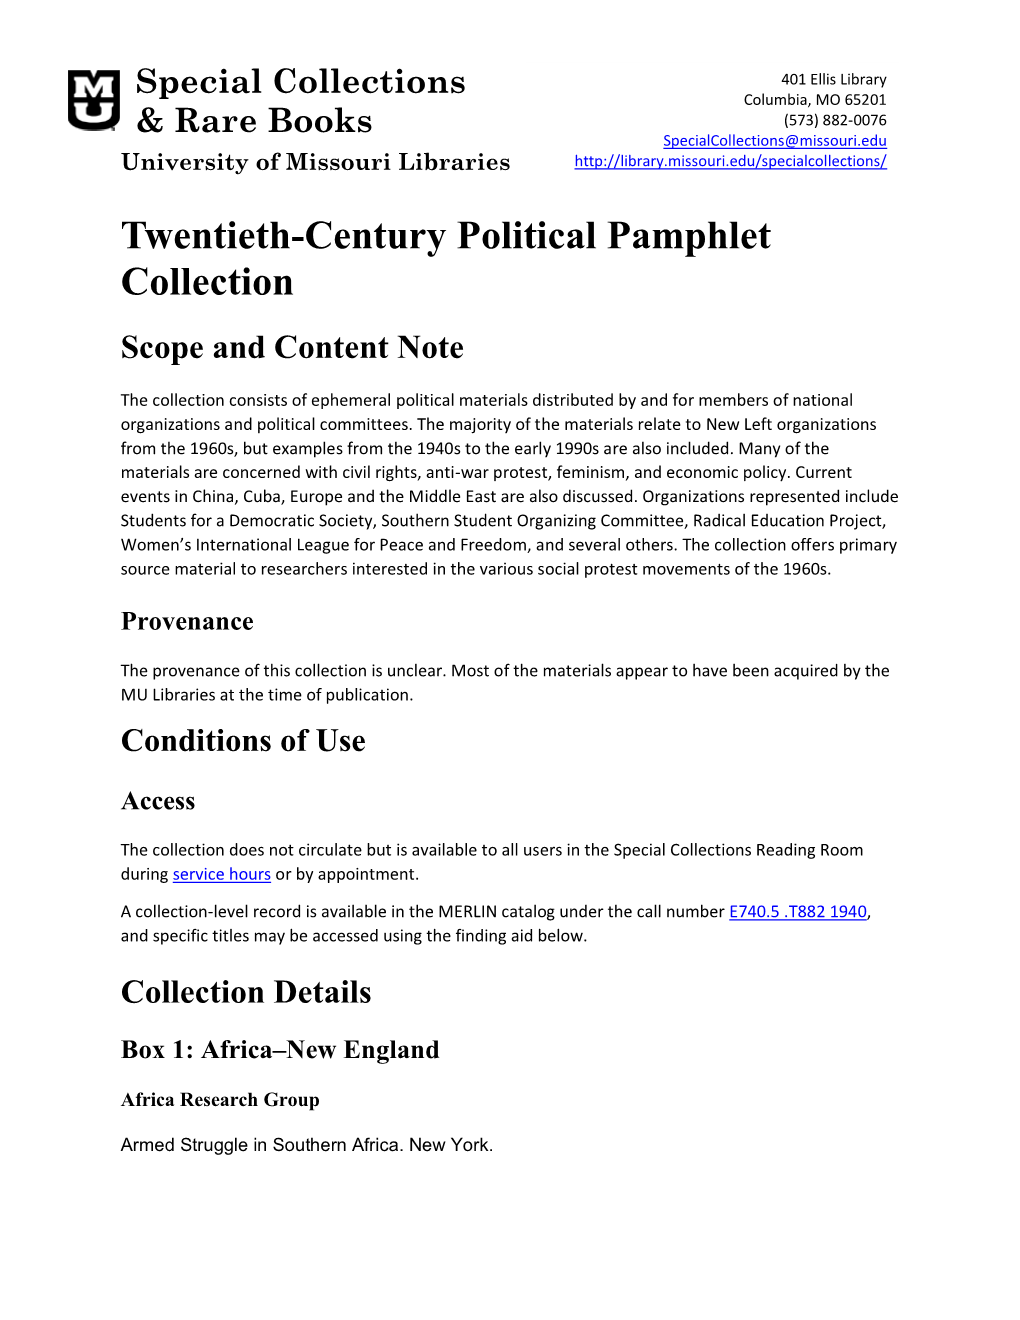 Twentieth-Century Political Pamphlet Collection Scope and Content Note